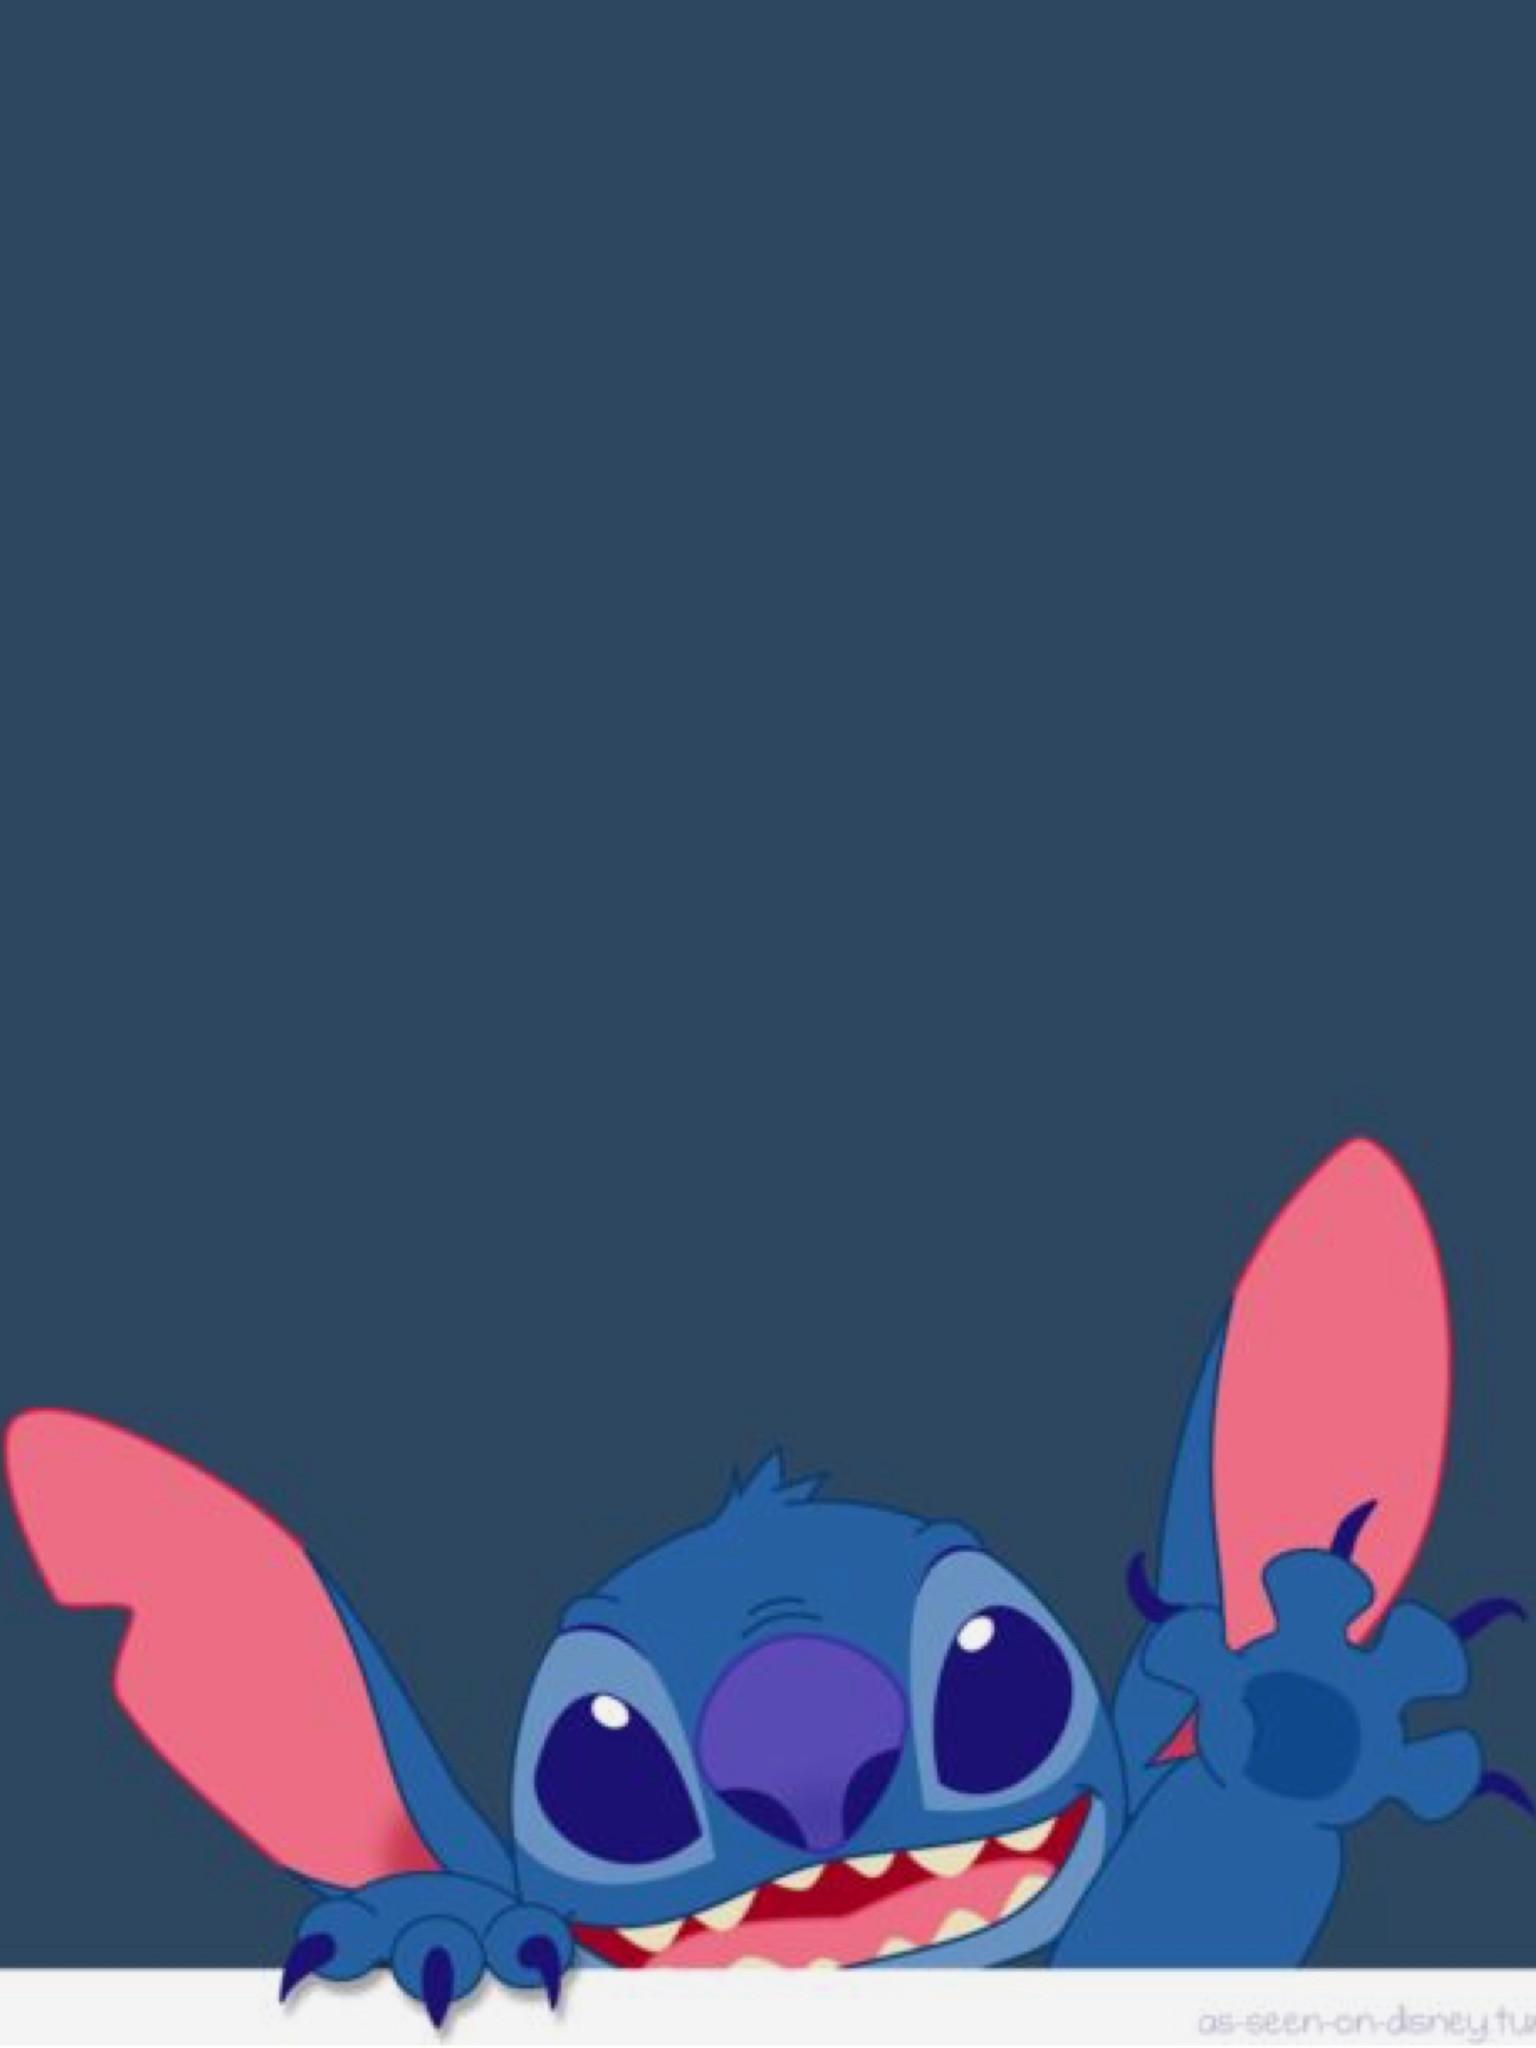 Stitch Black Wallpapers - Top Free Stitch Black Backgrounds ...